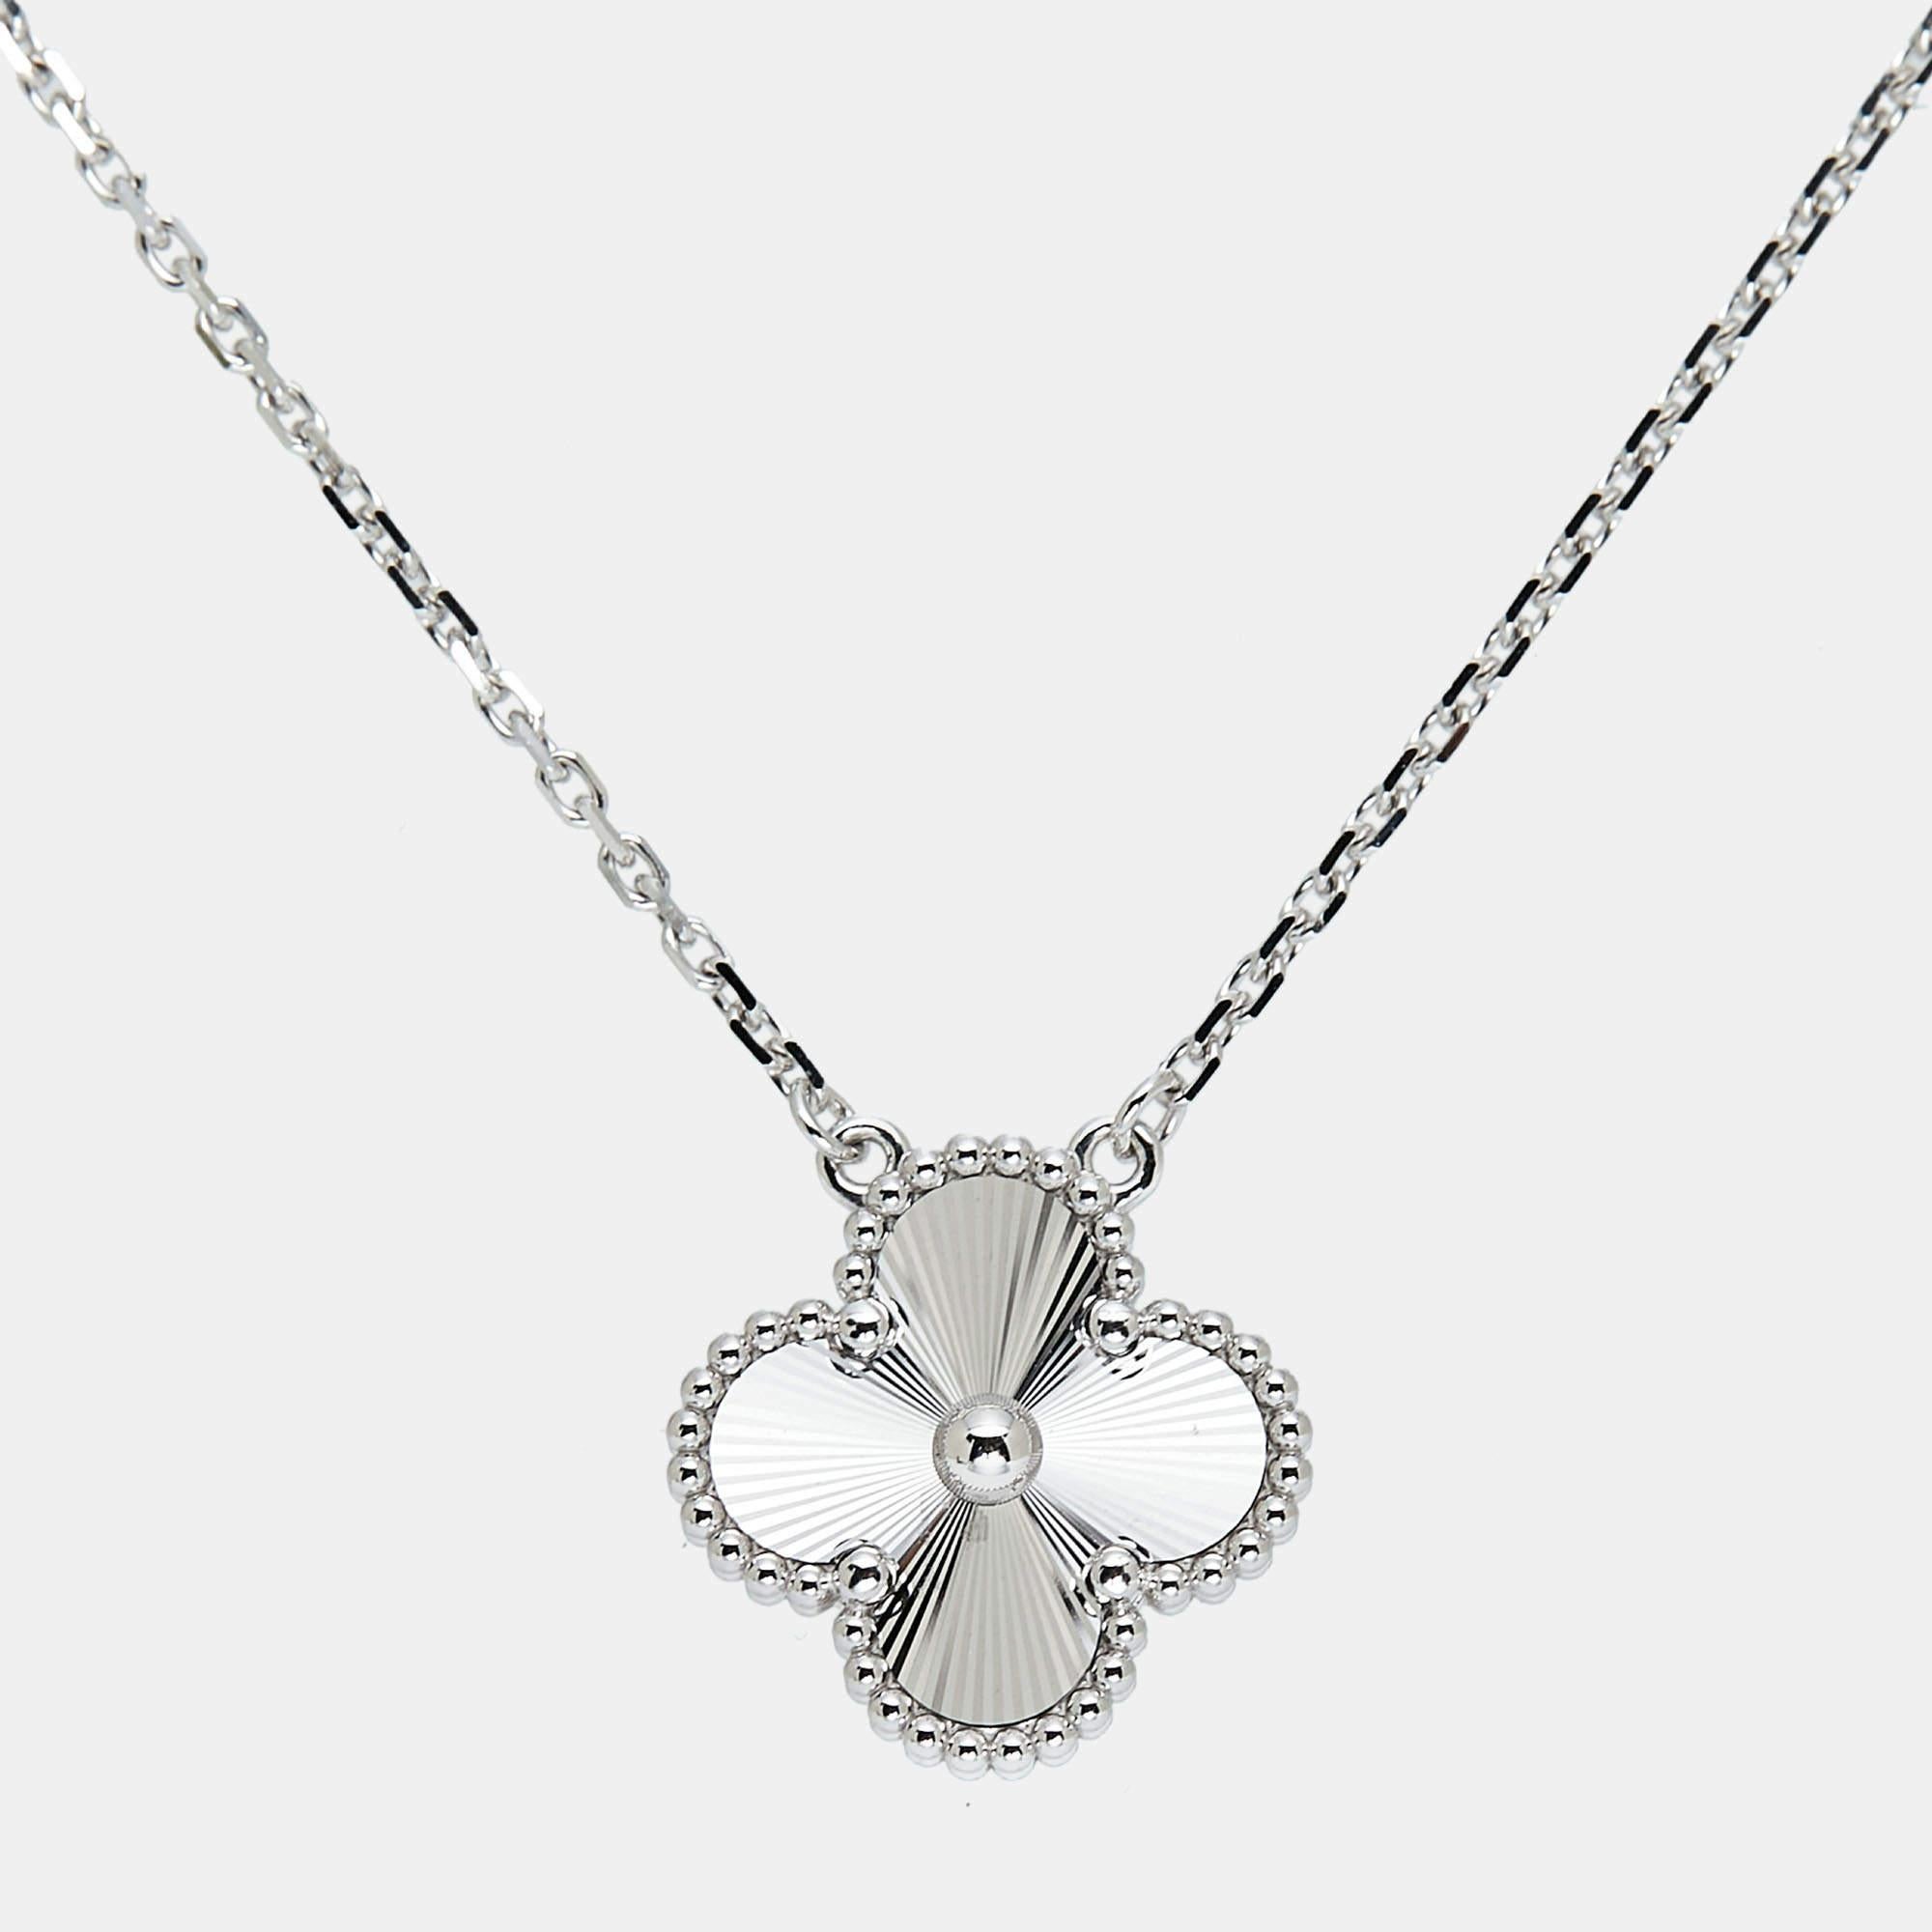 Contemporary Van Cleef & Arpels Guilloché Rhodium Plated 18K White Gold Pendant Necklace